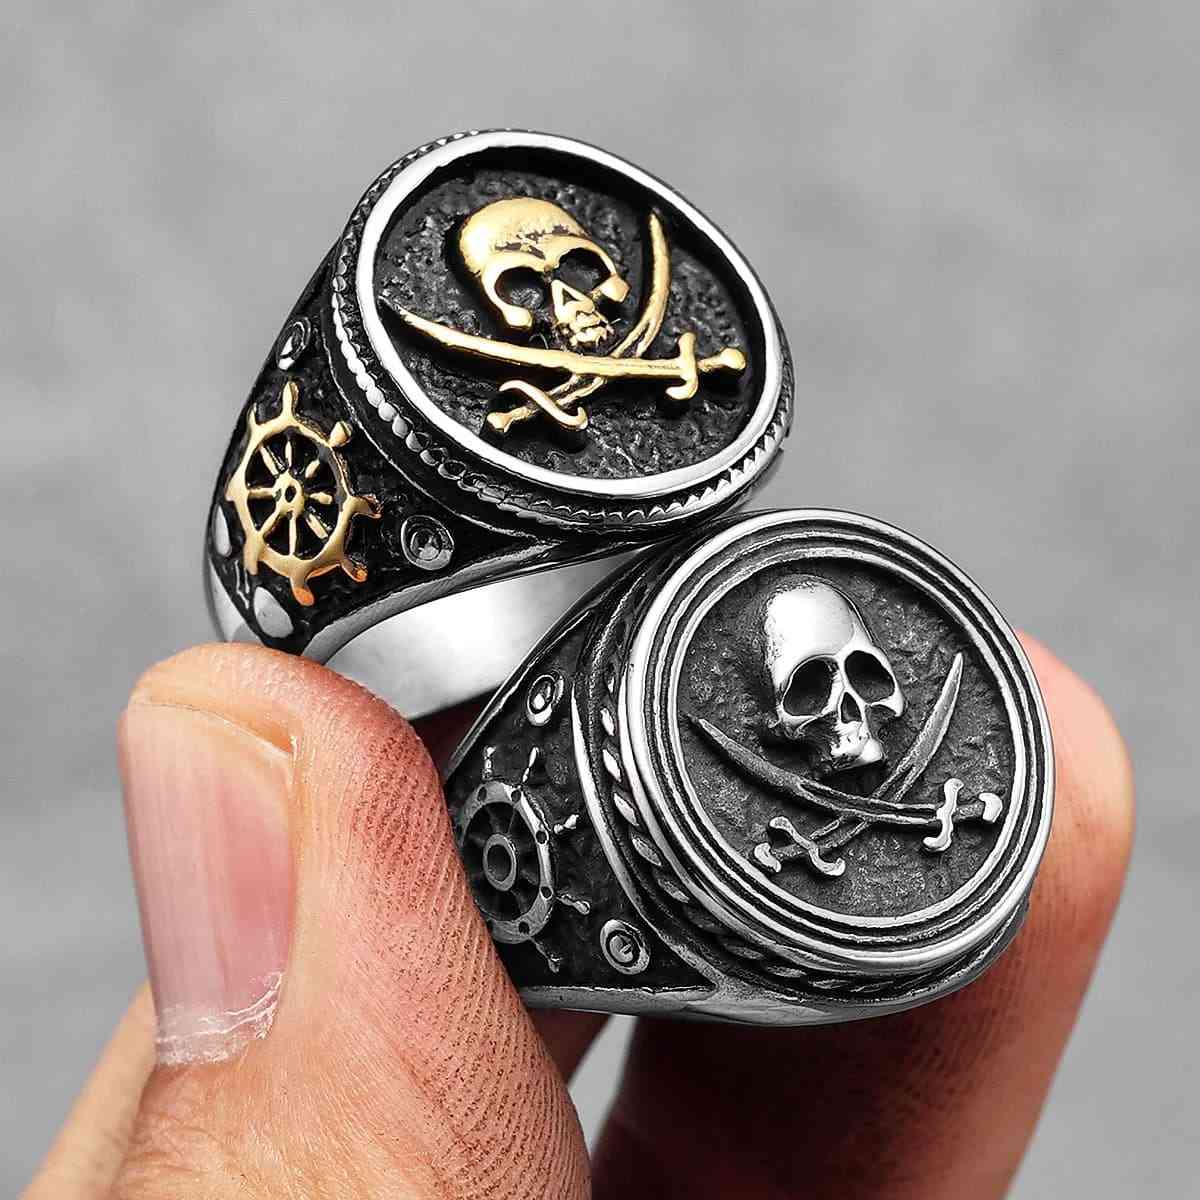 Pirate Signet Ring with Skull and Swords